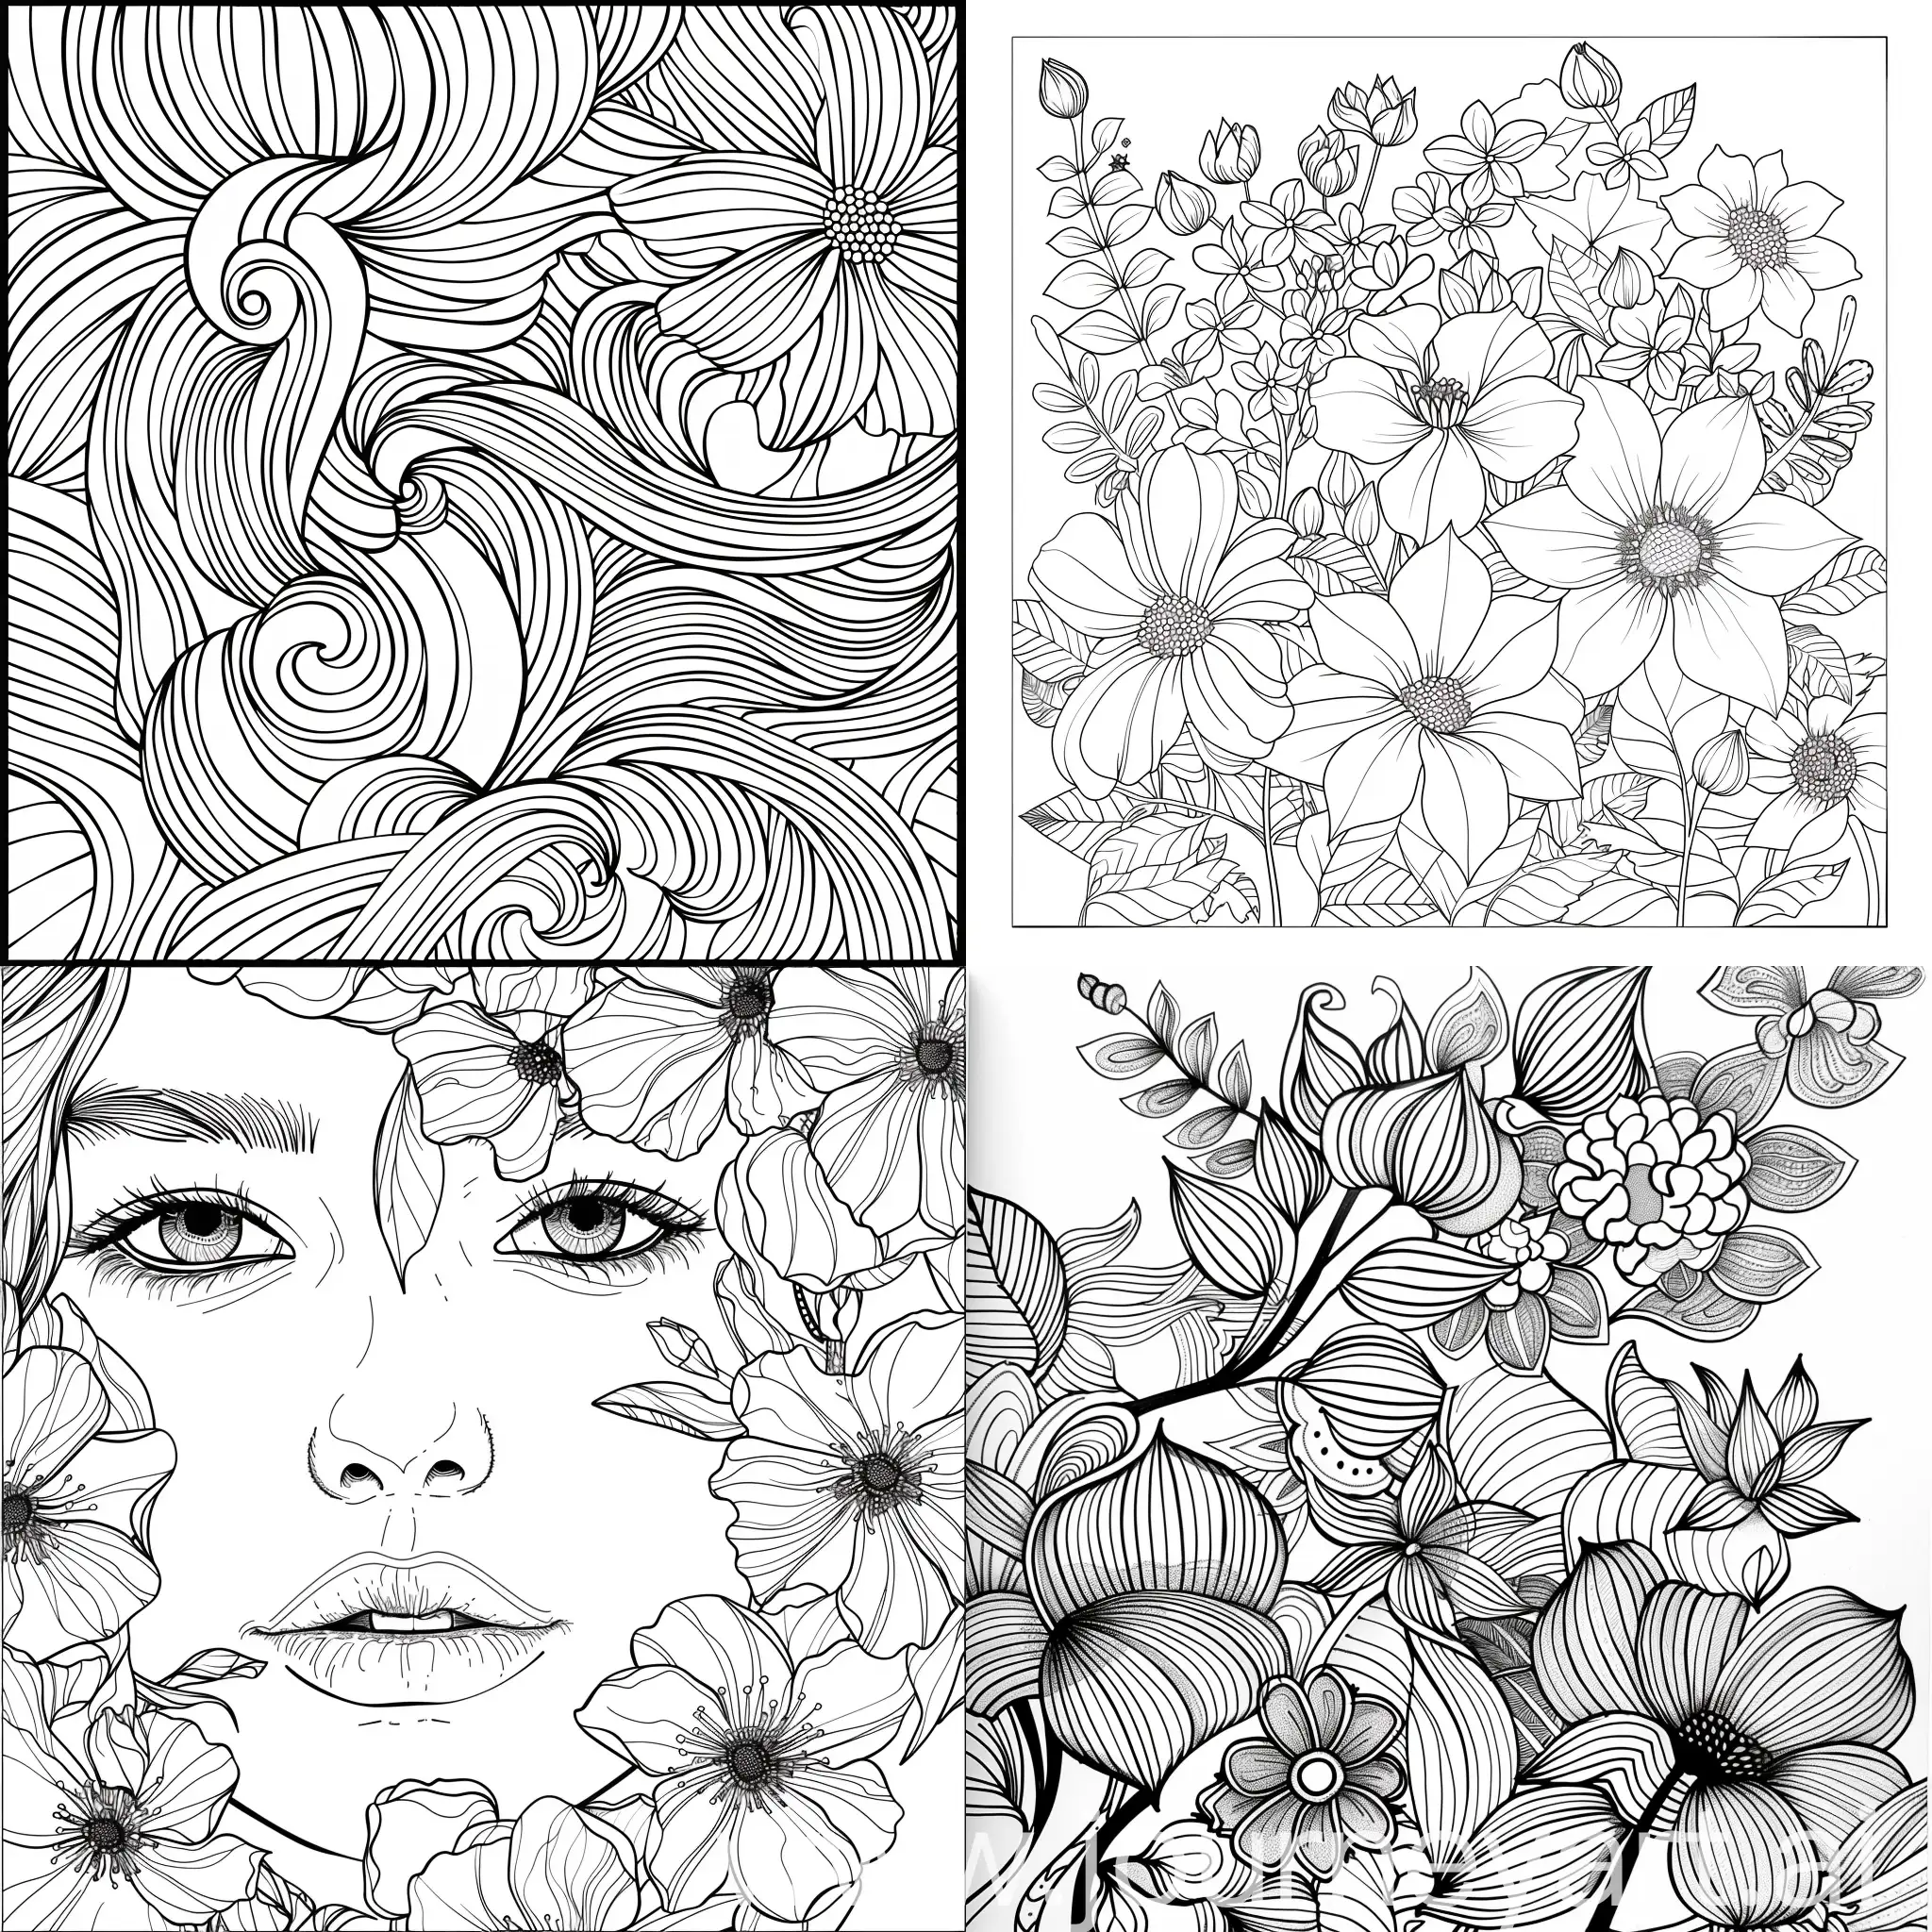 Coloring page astetich, mindfullness, white background, clean Line, fine Line art